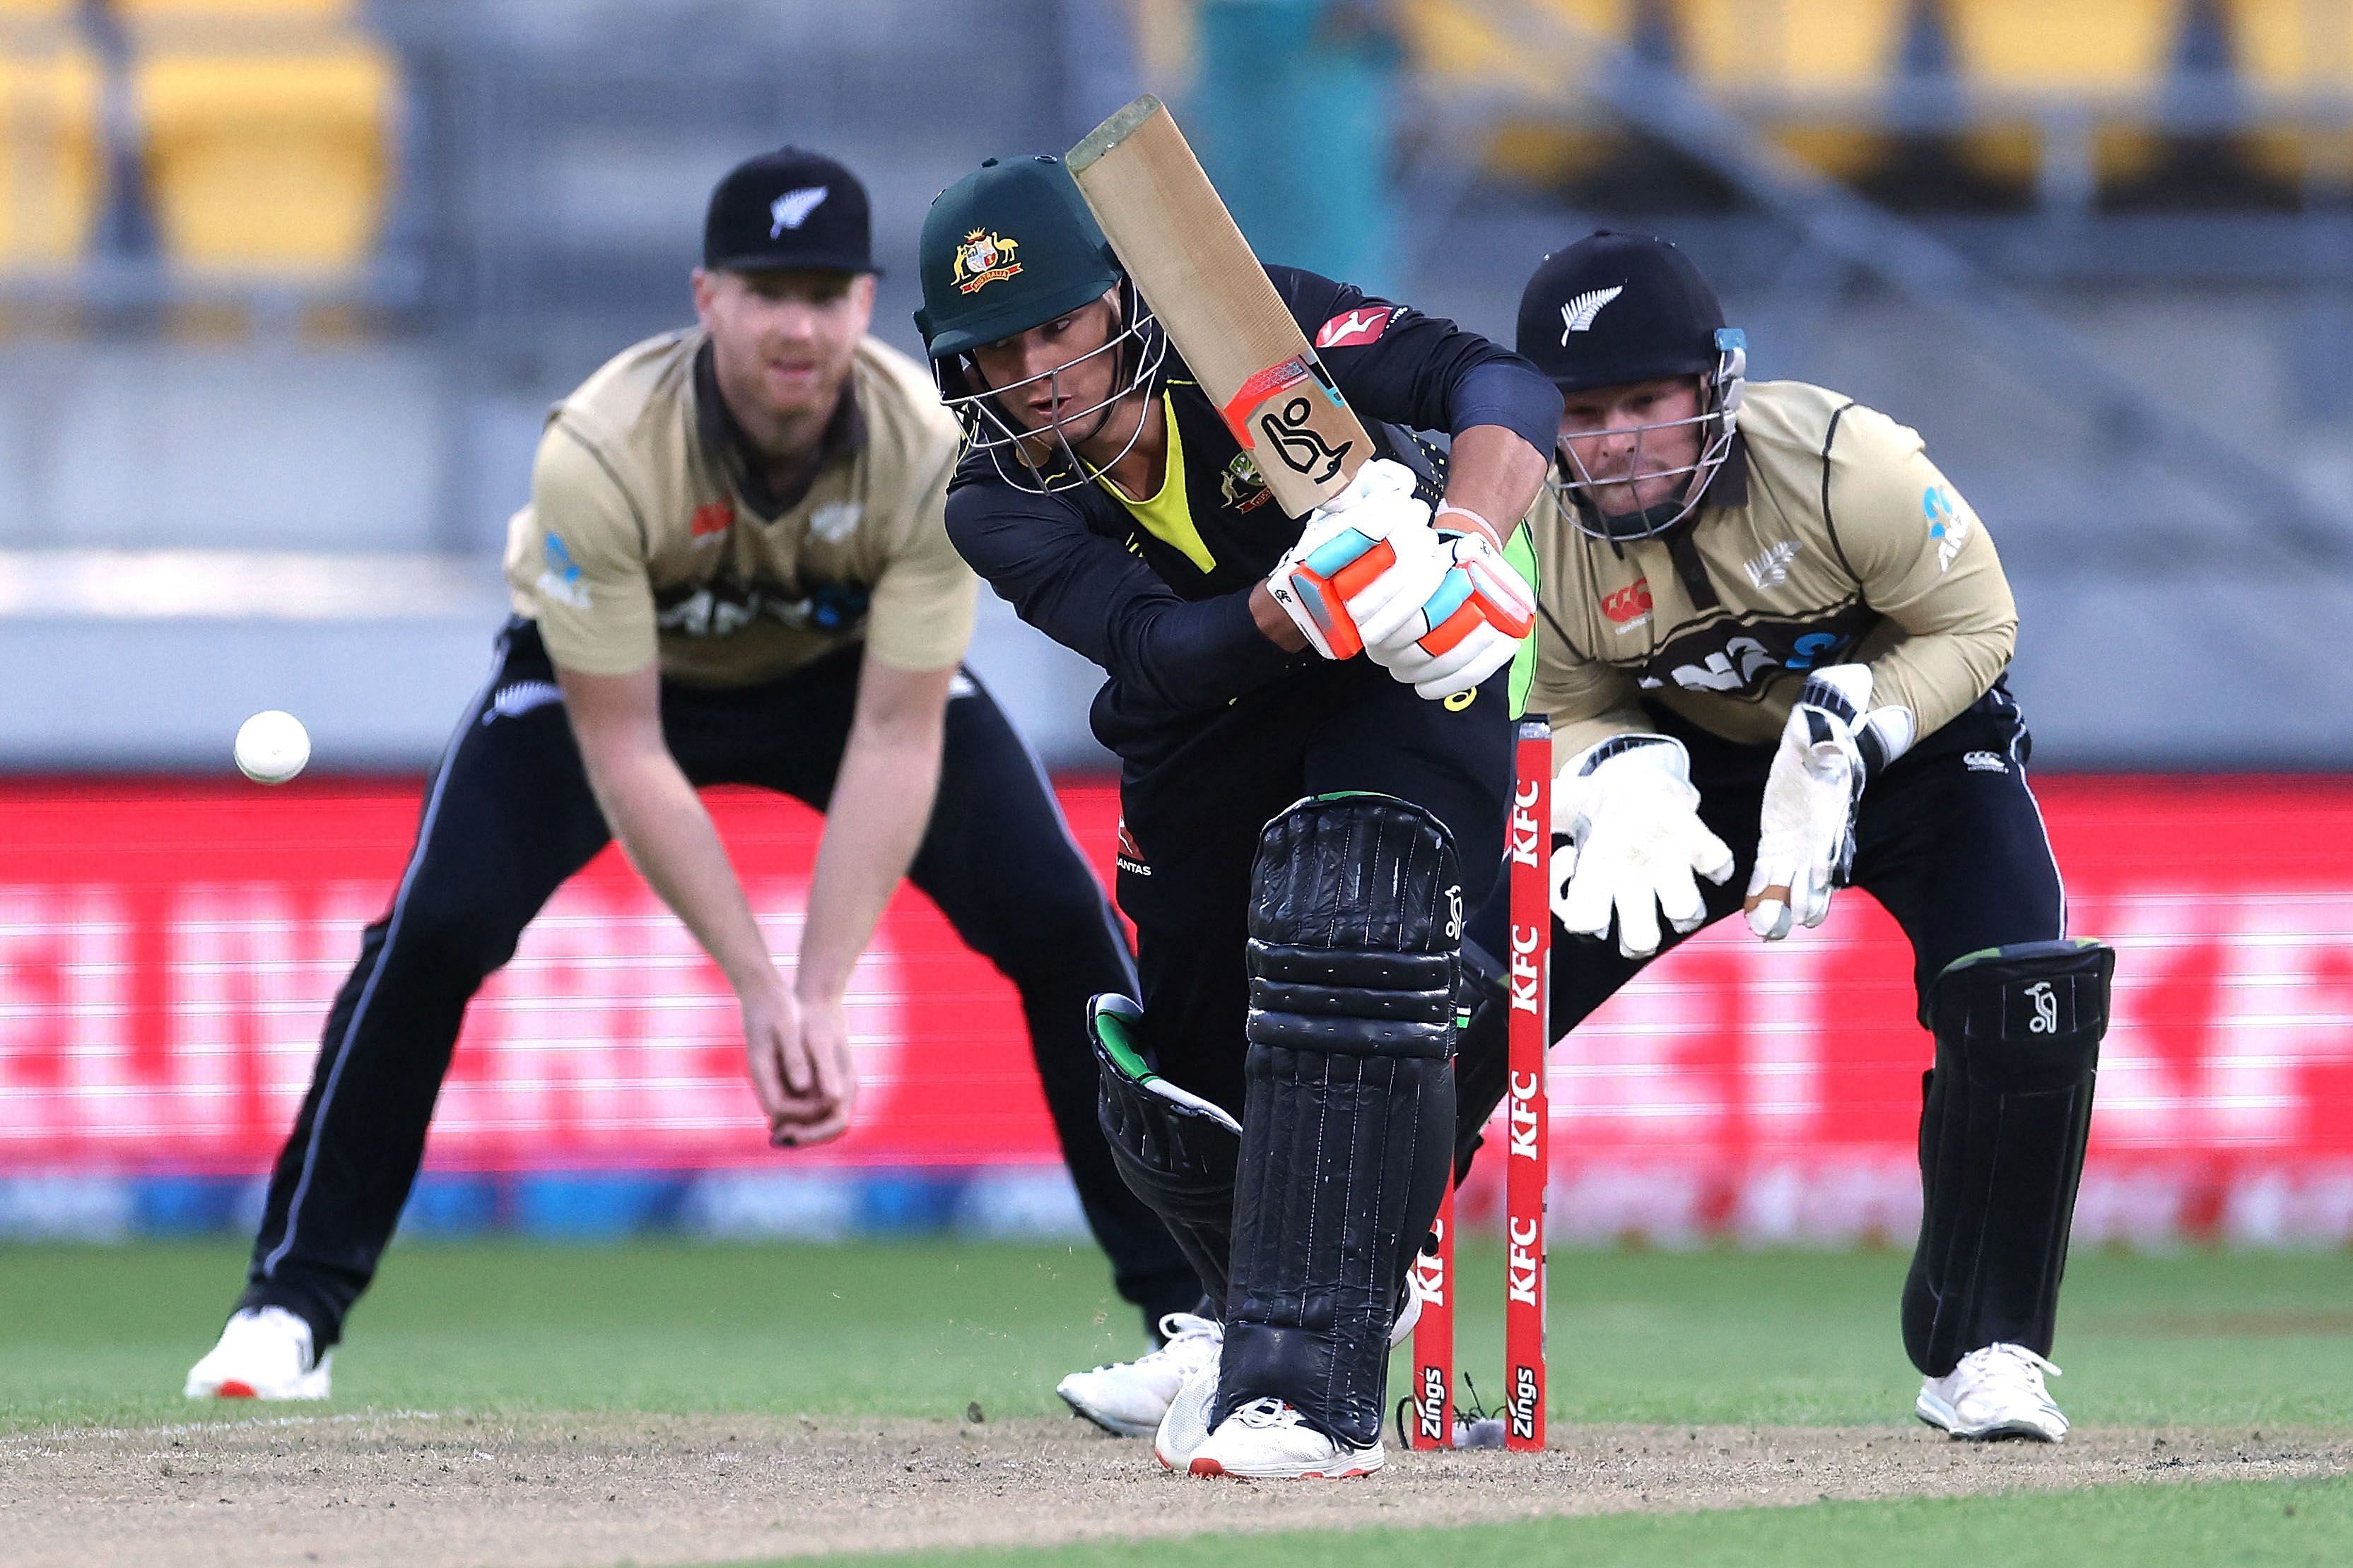 Australia's Josh Philippe plays a shot in front of New Zealand's wicket keeper Tim Seifert (R) during the fourth Twenty20 cricket match between New Zealand and Australia in Wellington on March 5, 2021. Credit: AFP Photo